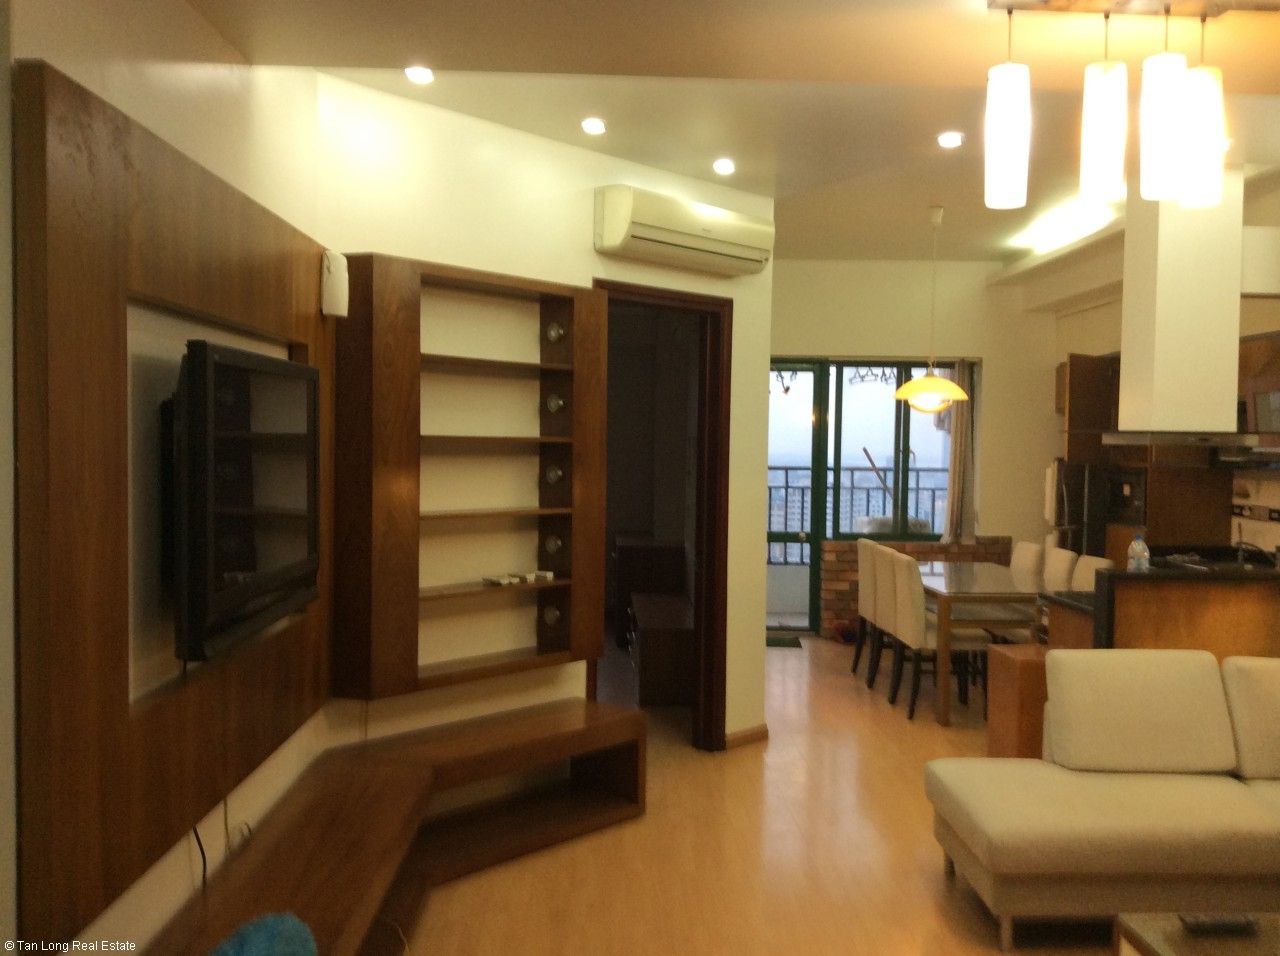 Fully equipped 3 bedroom apartment for rent in Kinh Do Building, Hai Ba Trung dist, Hanoi 1